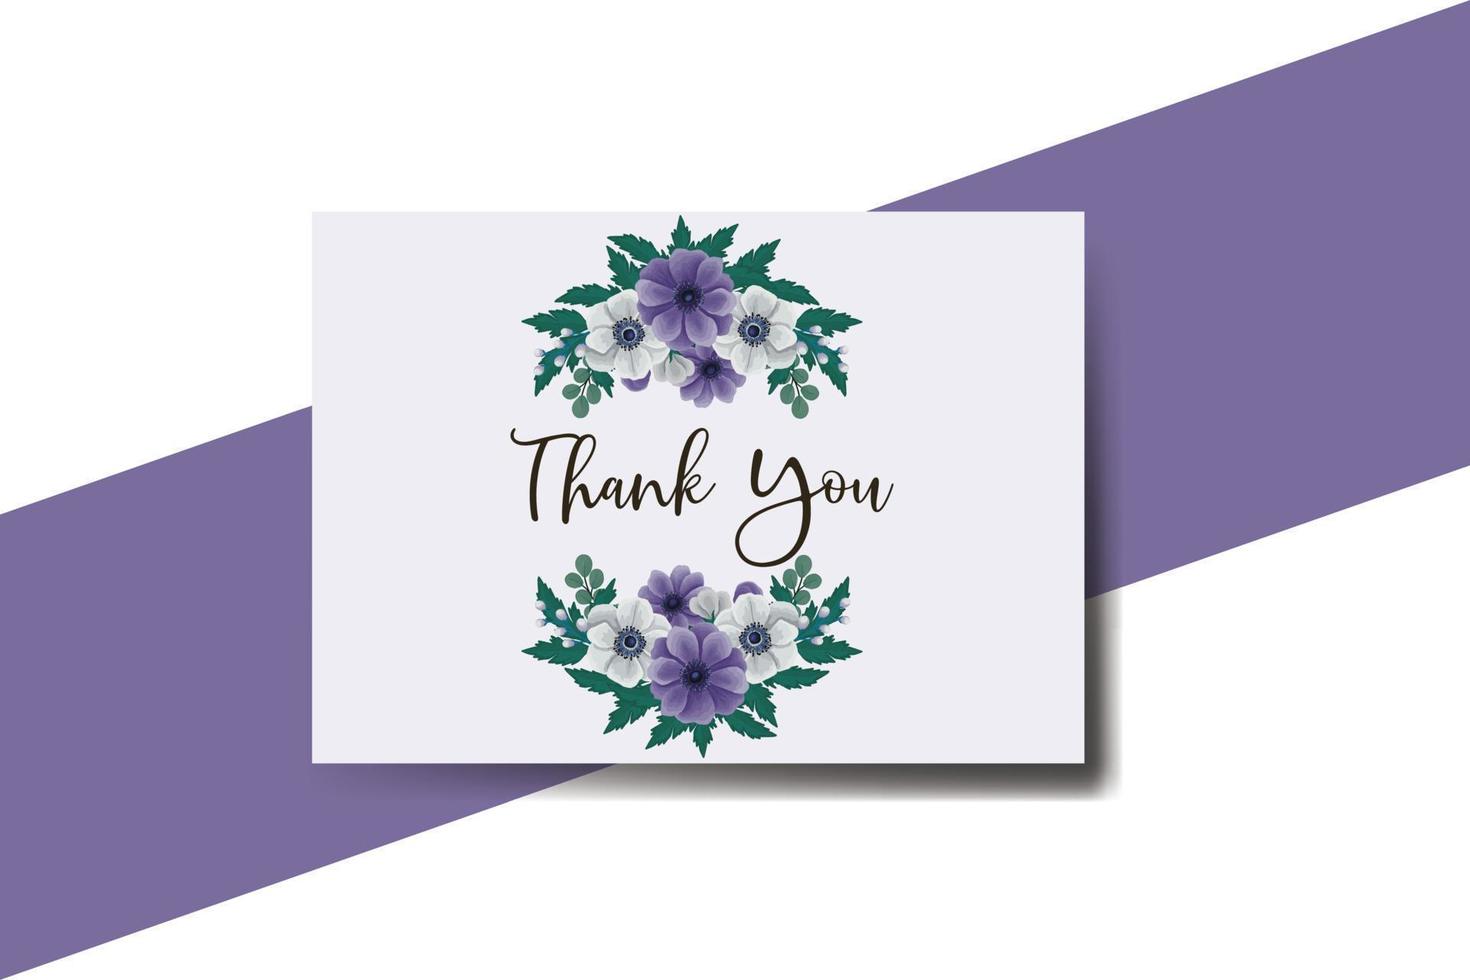 Thank you card Greeting Card Anemone Flower Design Template vector